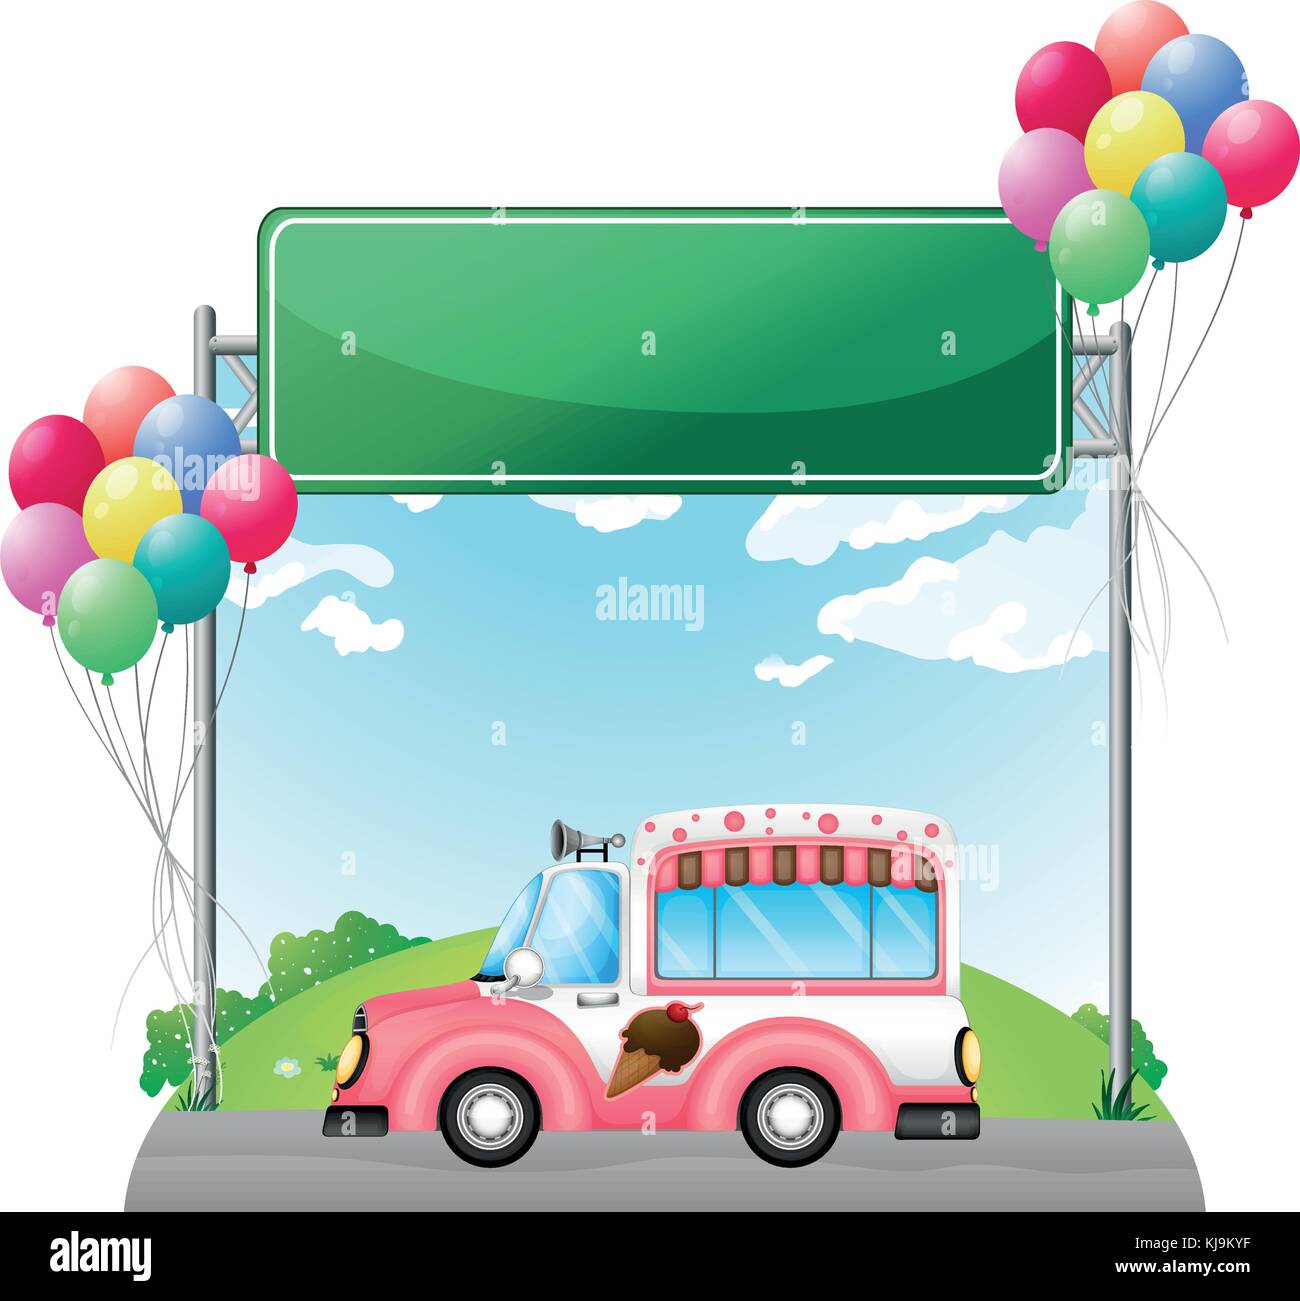 Illustration of a pink ice cream bus near an empty green board on a white background Stock Vector